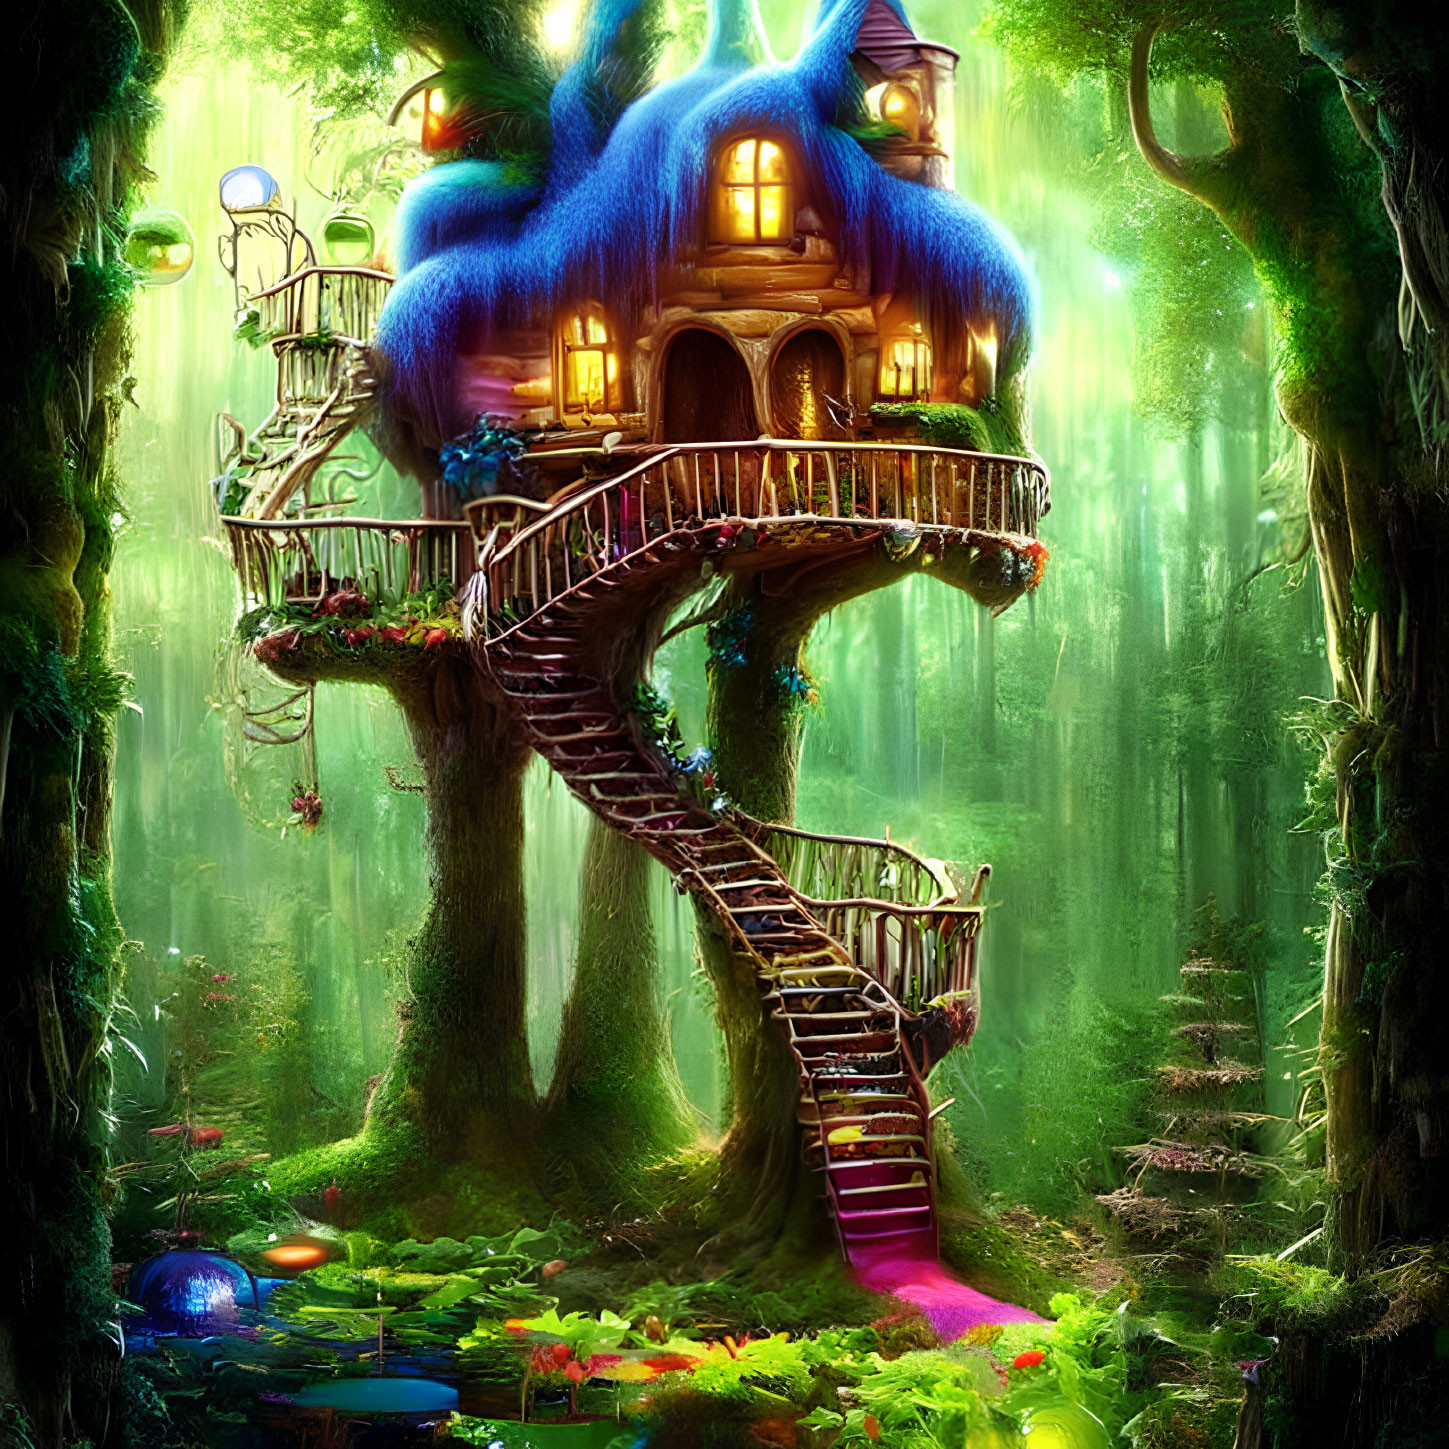 Whimsical treehouse with blue thatched roof in enchanted forest